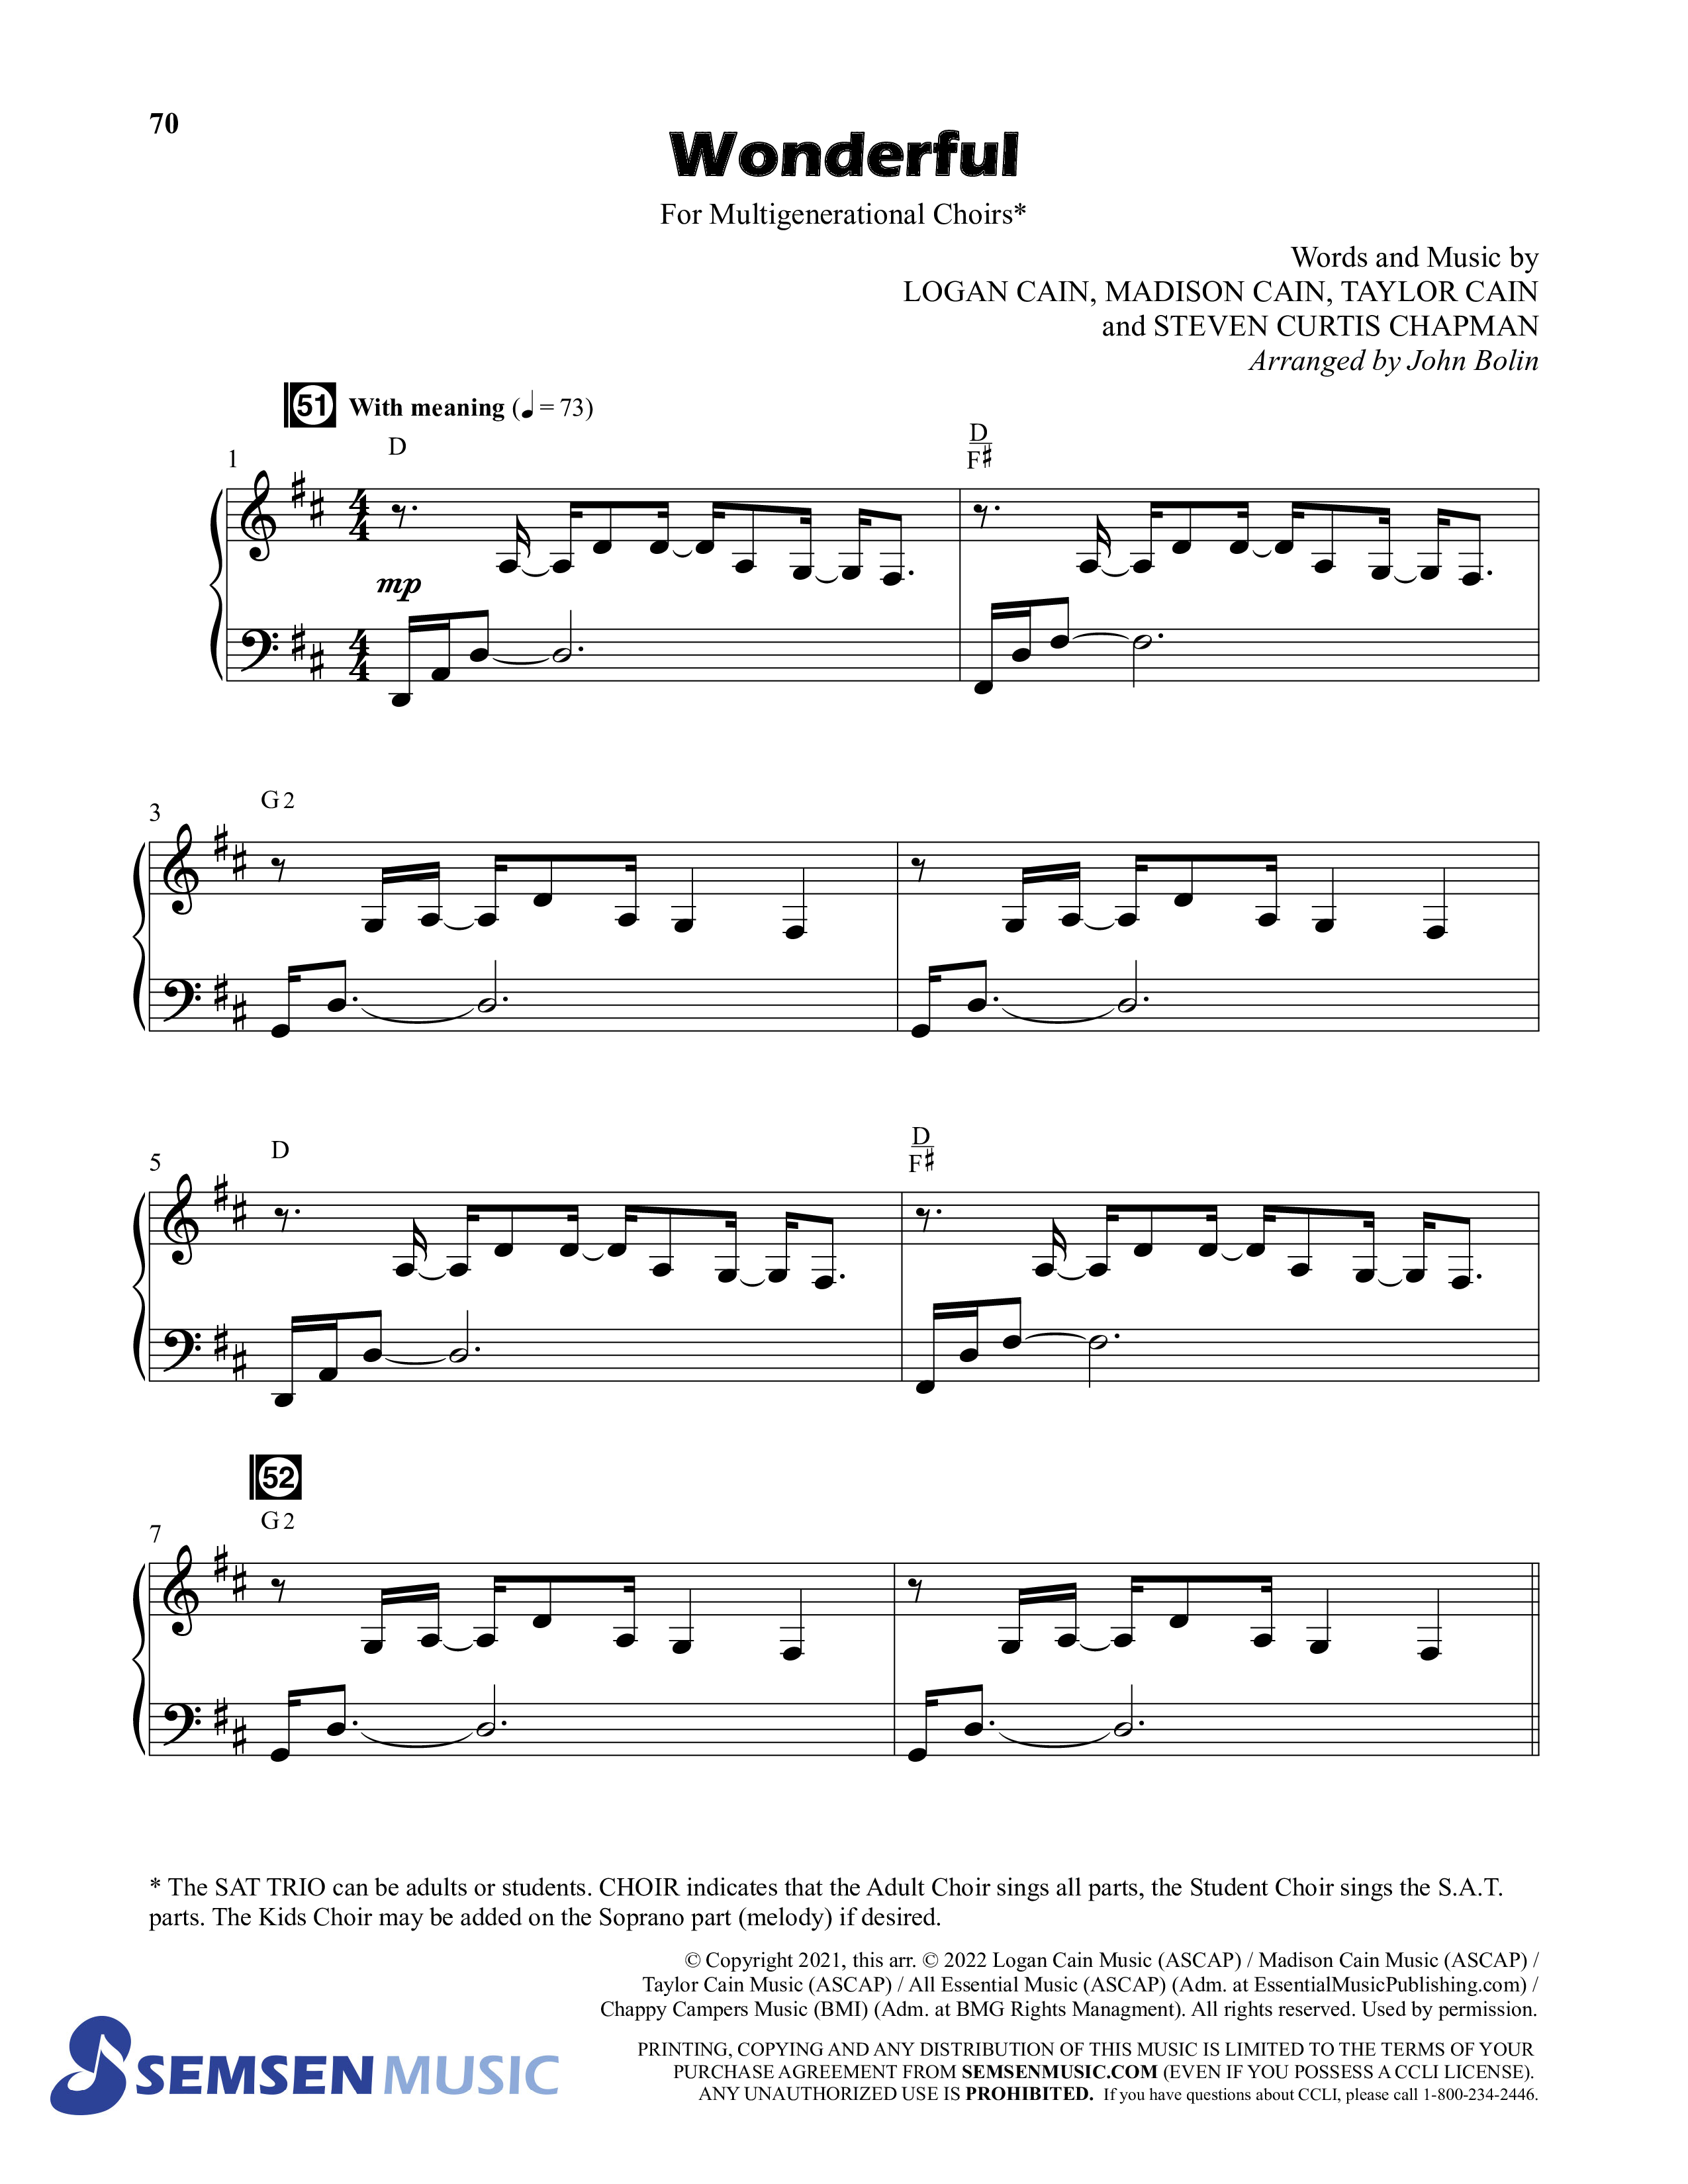 Wonderful (8 Song Choral Collection) Song 6 (Piano SATB) (Semsen Music / Arr. John Bolin / Orch. Cliff Duren)